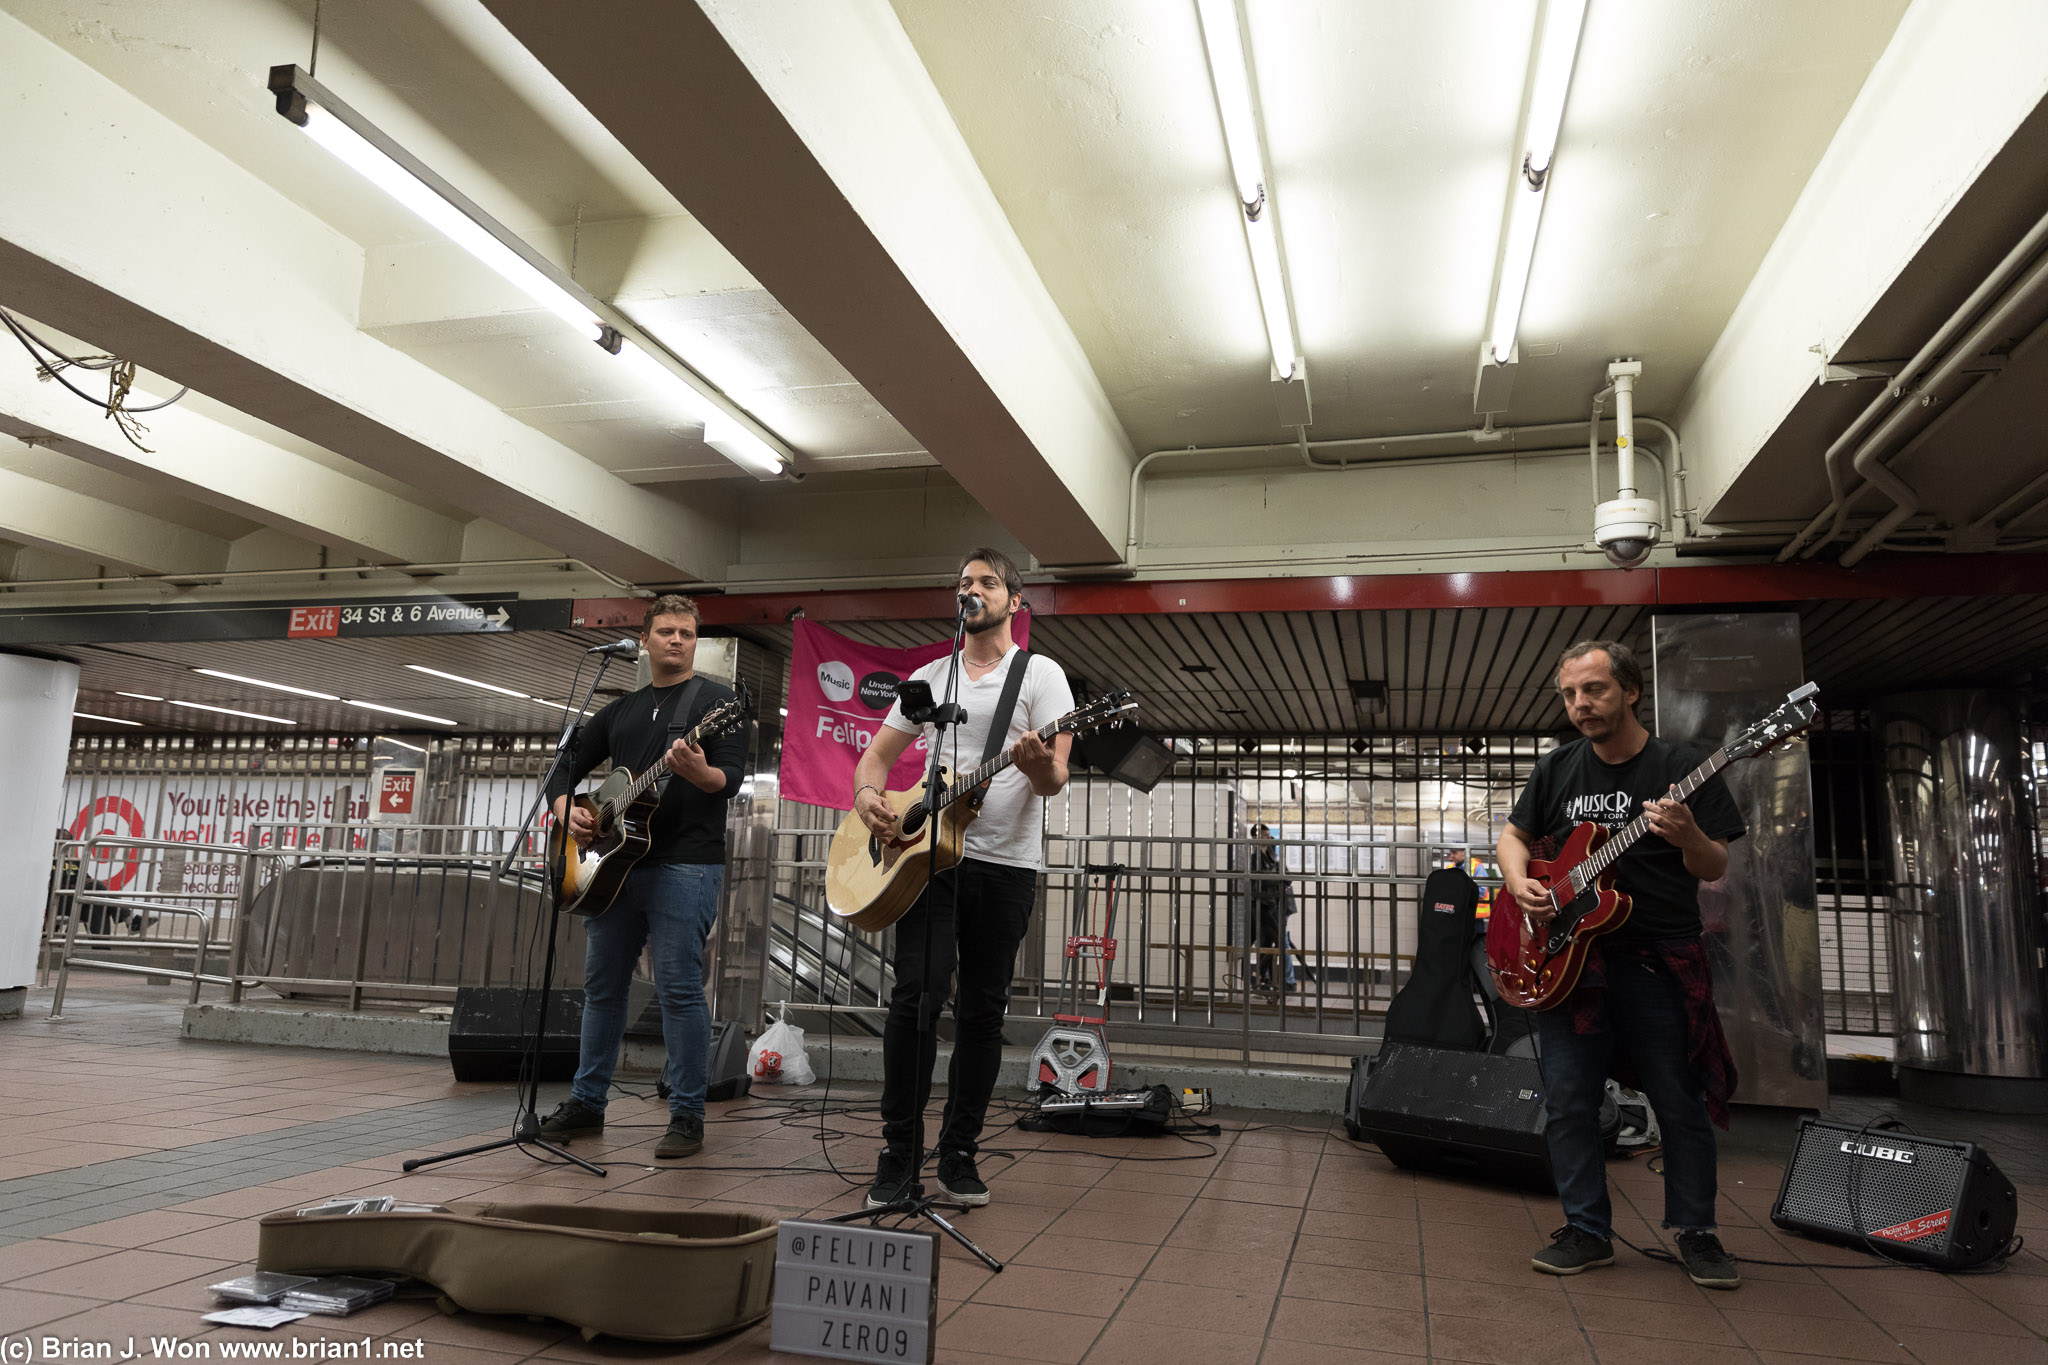 Street performers in the subway.